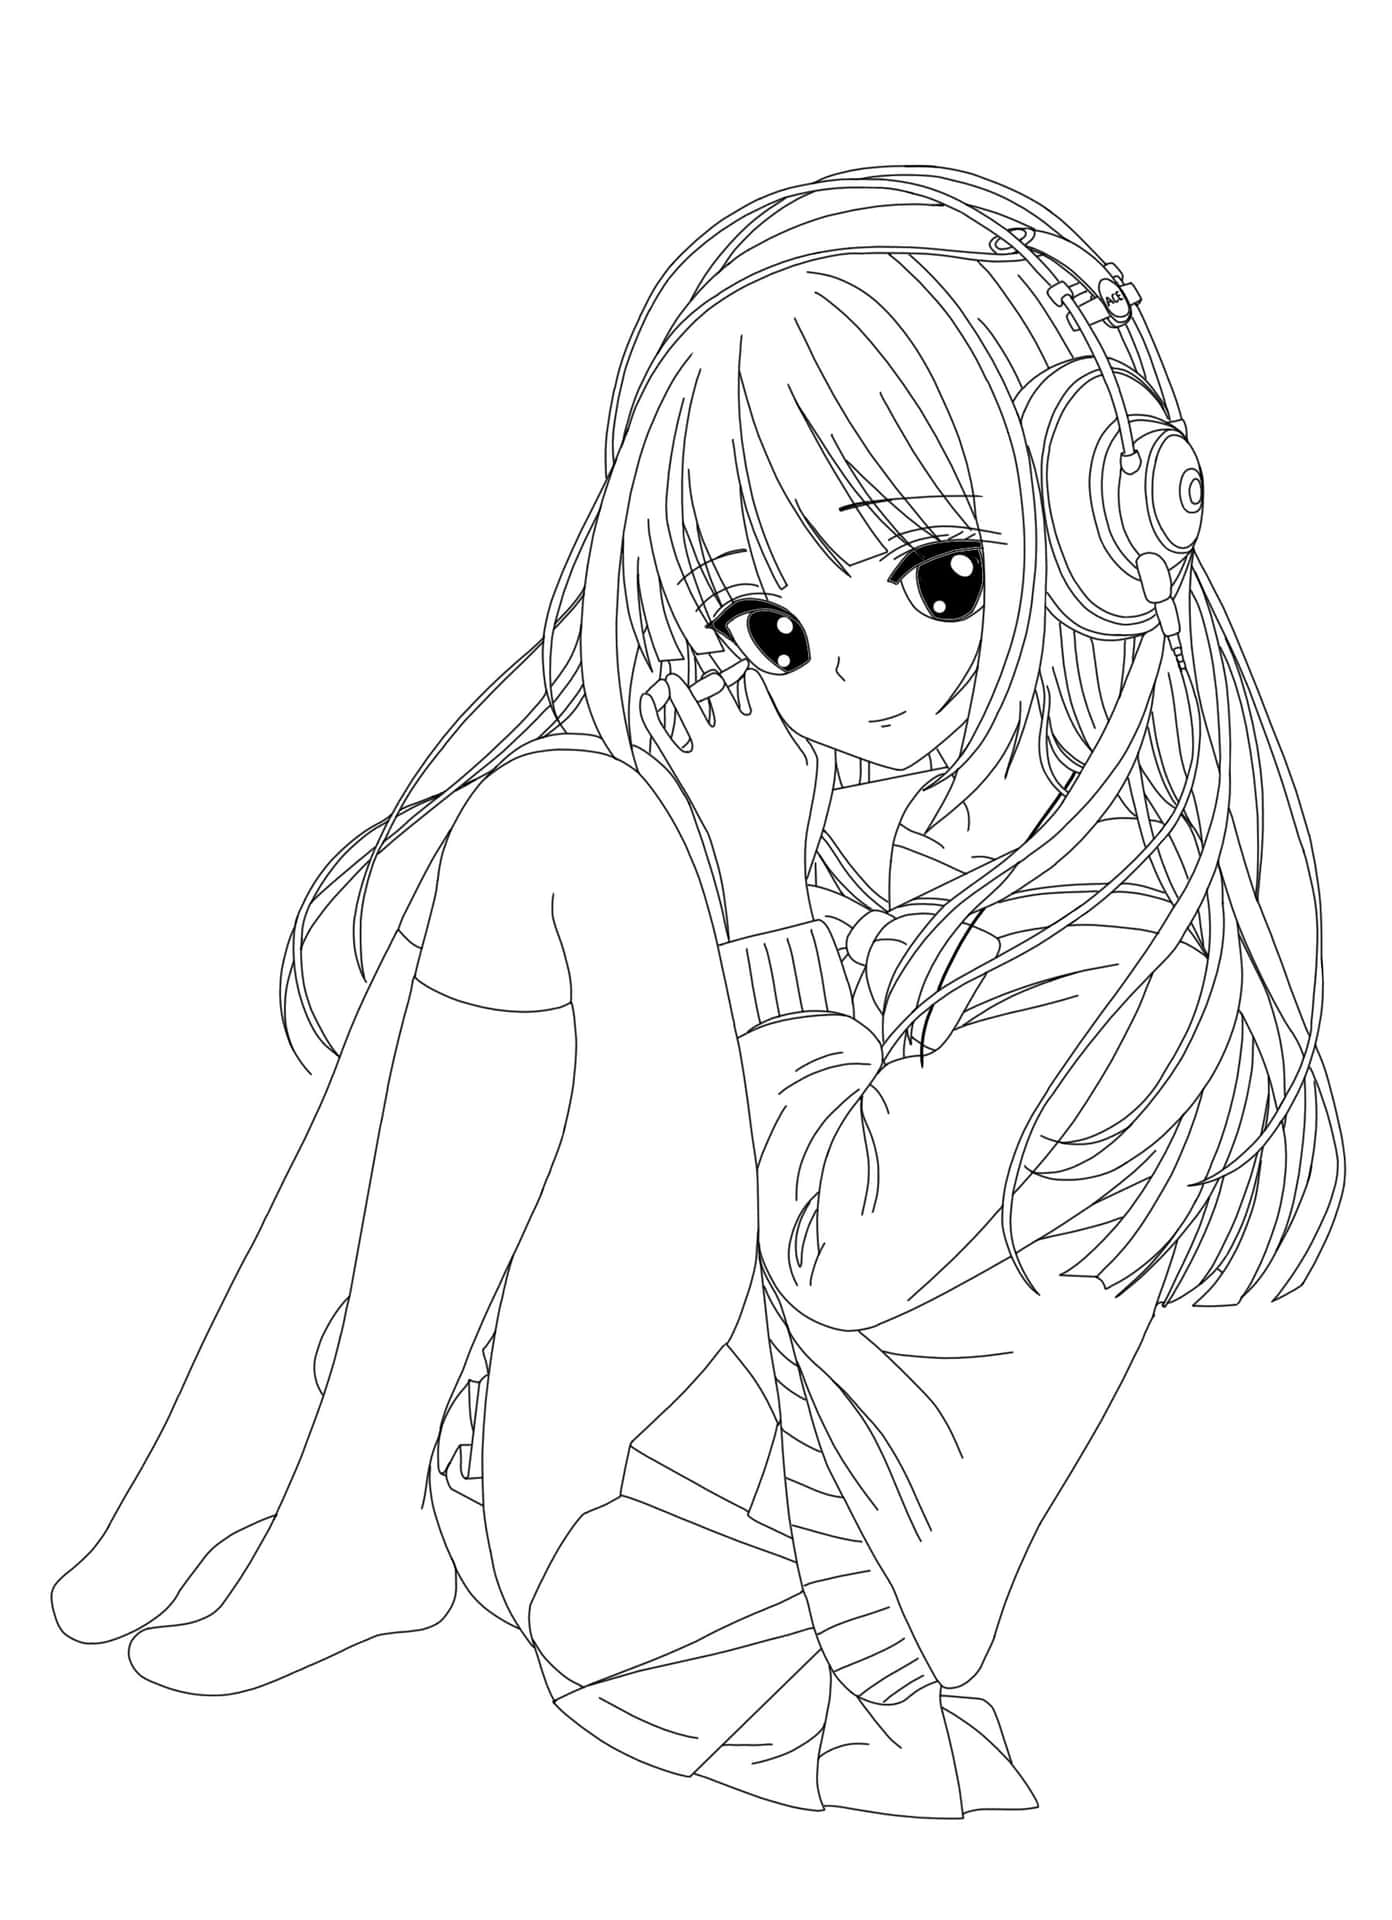 Coloring Pages | Printable Free Anime Coloring Pages for Kids-demhanvico.com.vn